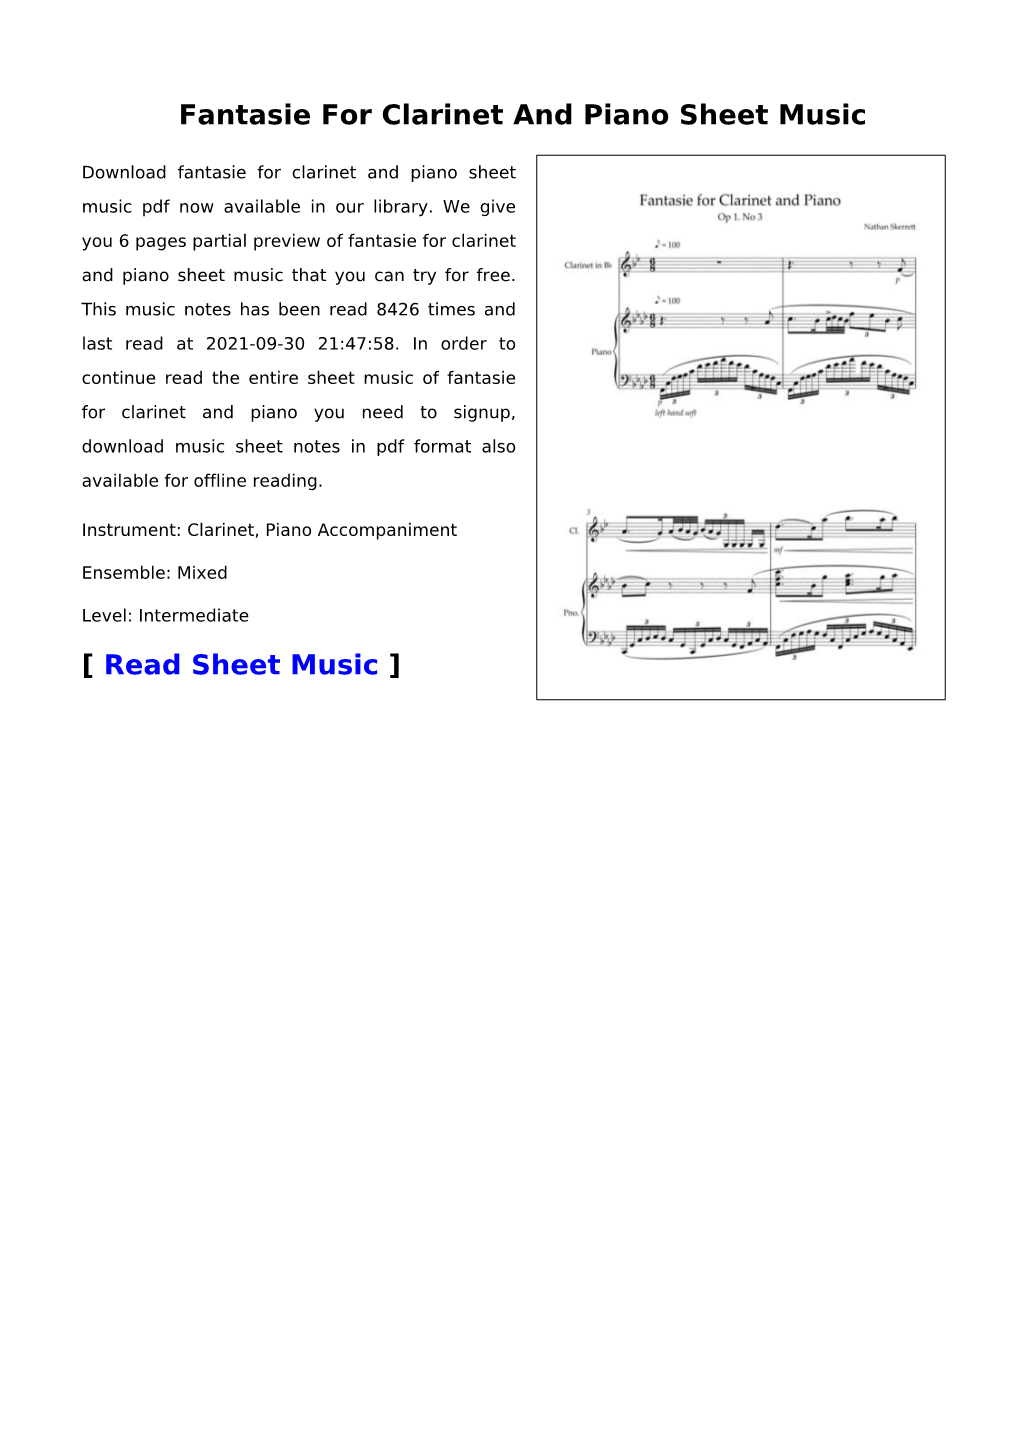 Fantasie for Clarinet and Piano Sheet Music